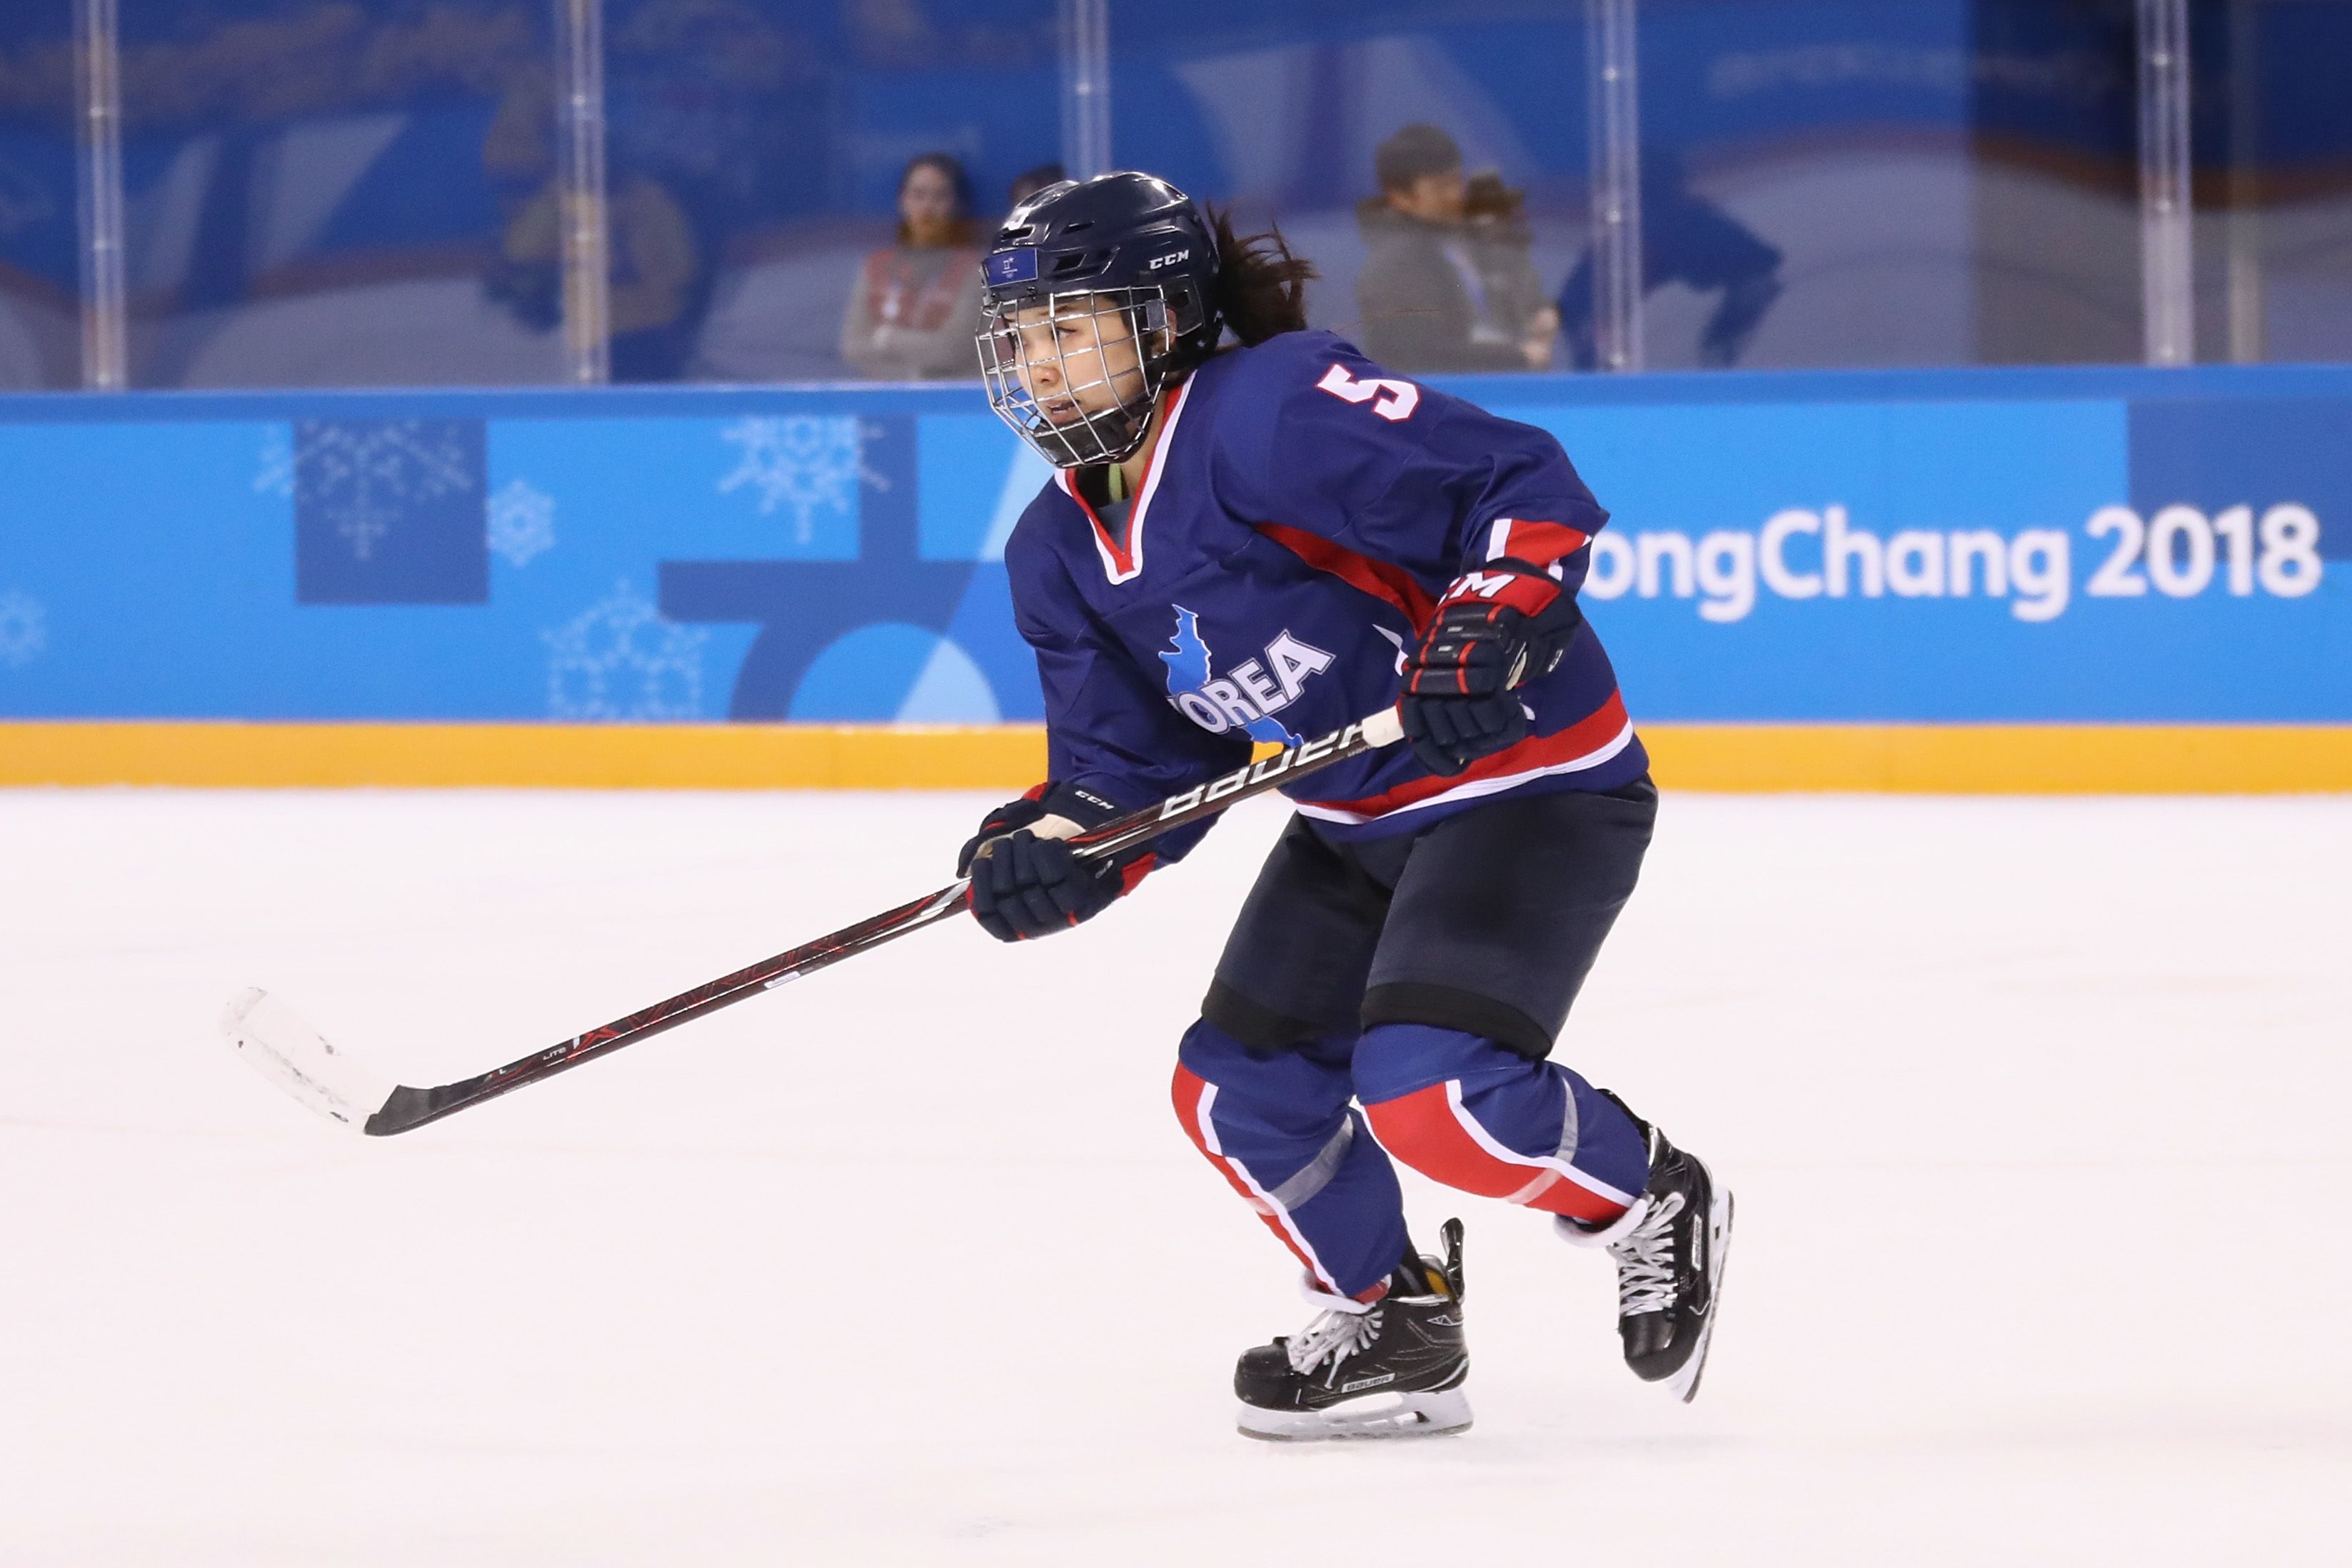 Olympic Spirit: The story of Korea's unified ice hockey team at